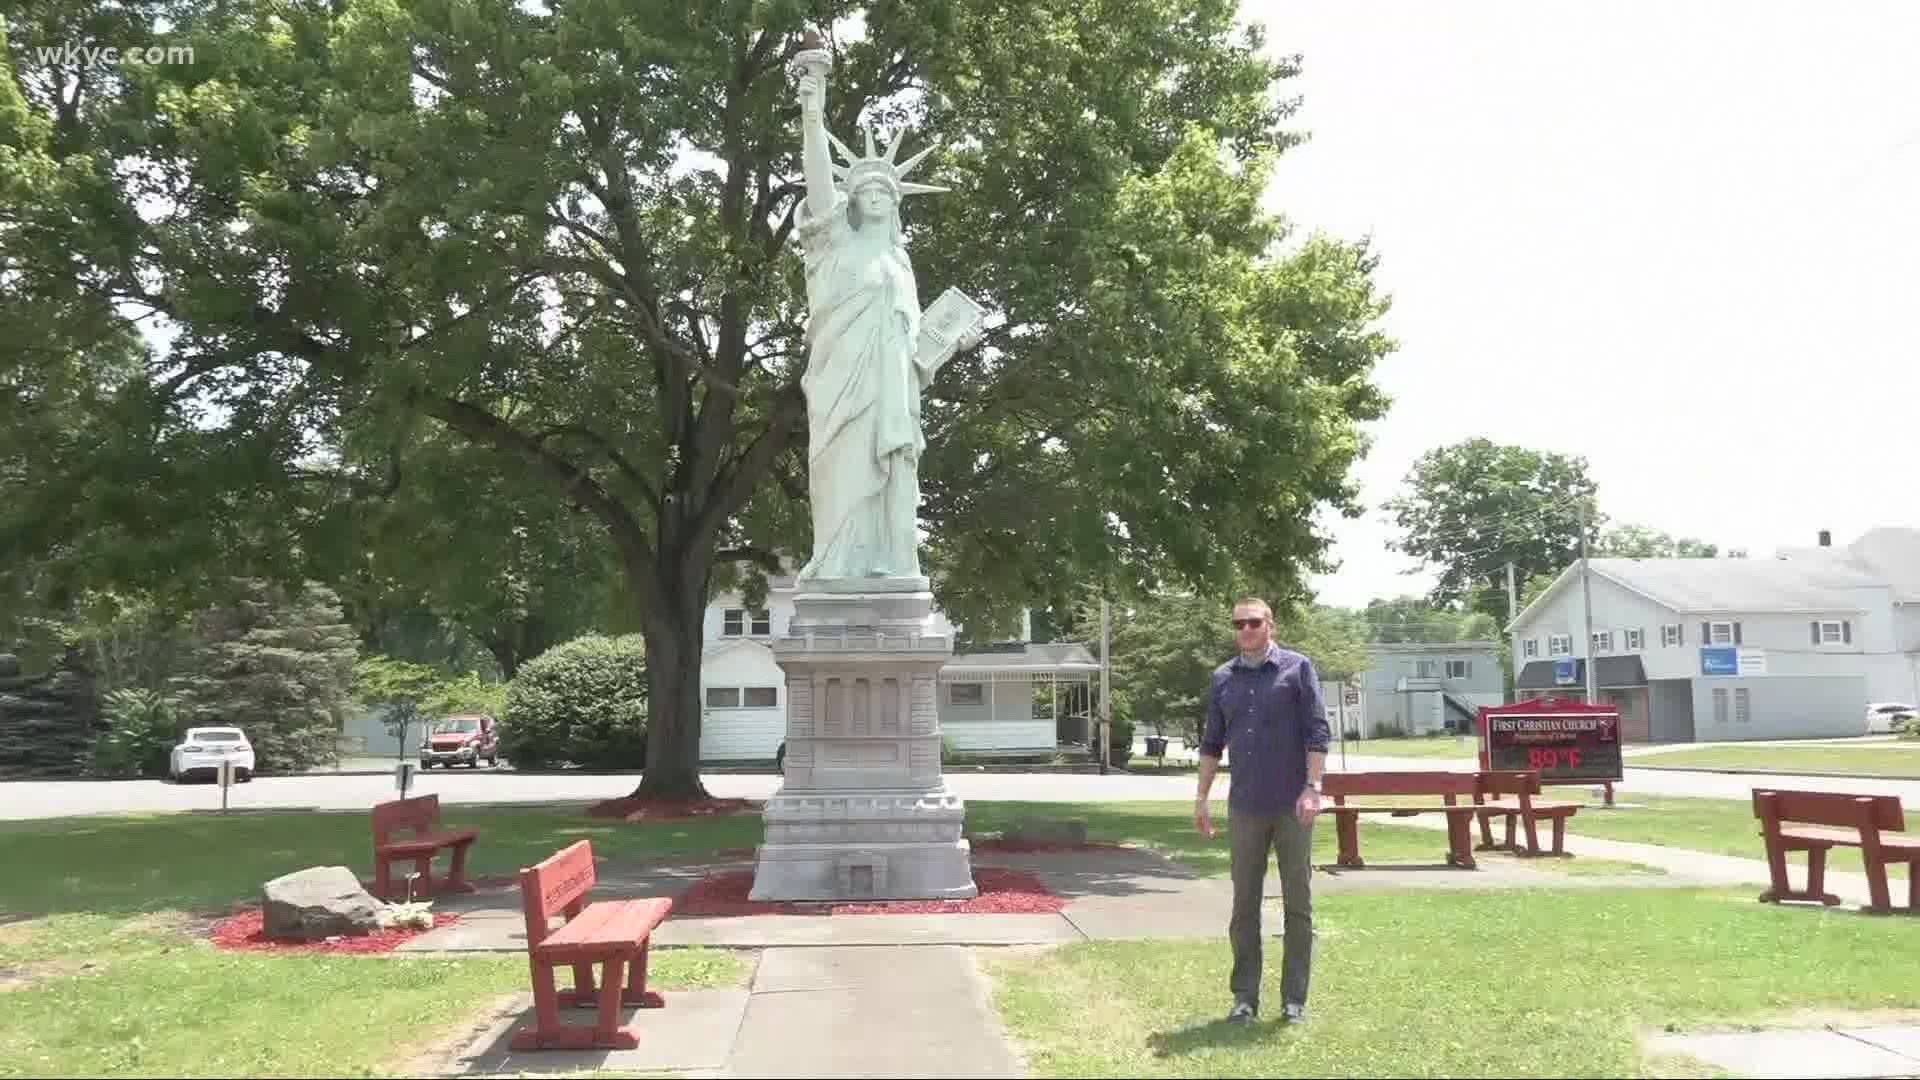 The city manager offered to accept some of the statues that are being torn down across the country.  Mike Polk Jr. has more on this.